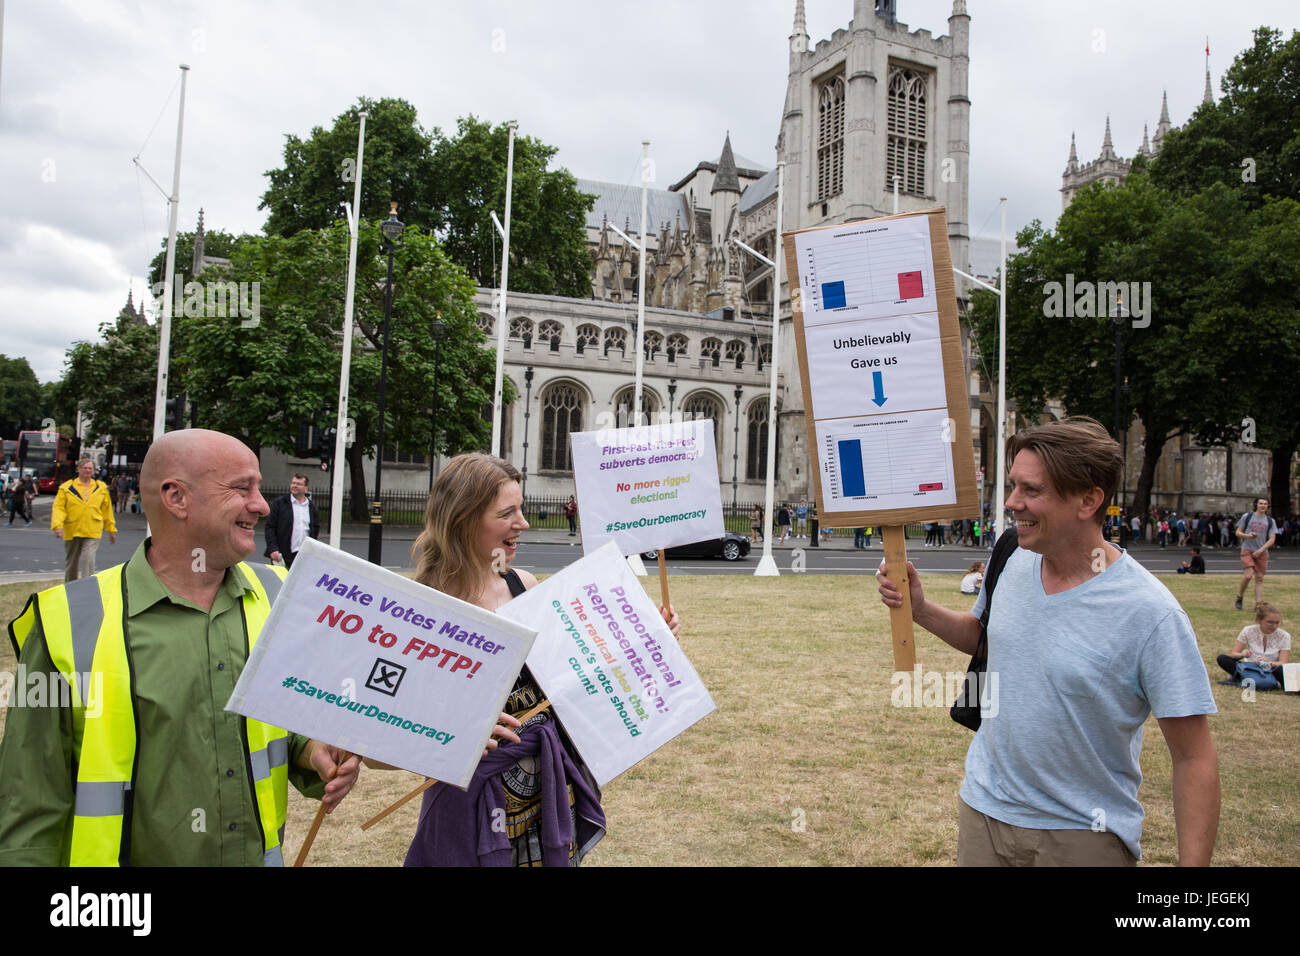 London, UK. 24th June, 2017. Activists hold signs at the Save Our Democracy rally in Parliament Square to call for proportional representation and to plan for the end to the UK's undemocratic first-past-the-post voting system. Credit: Mark Kerrison/Alamy Live News Stock Photo